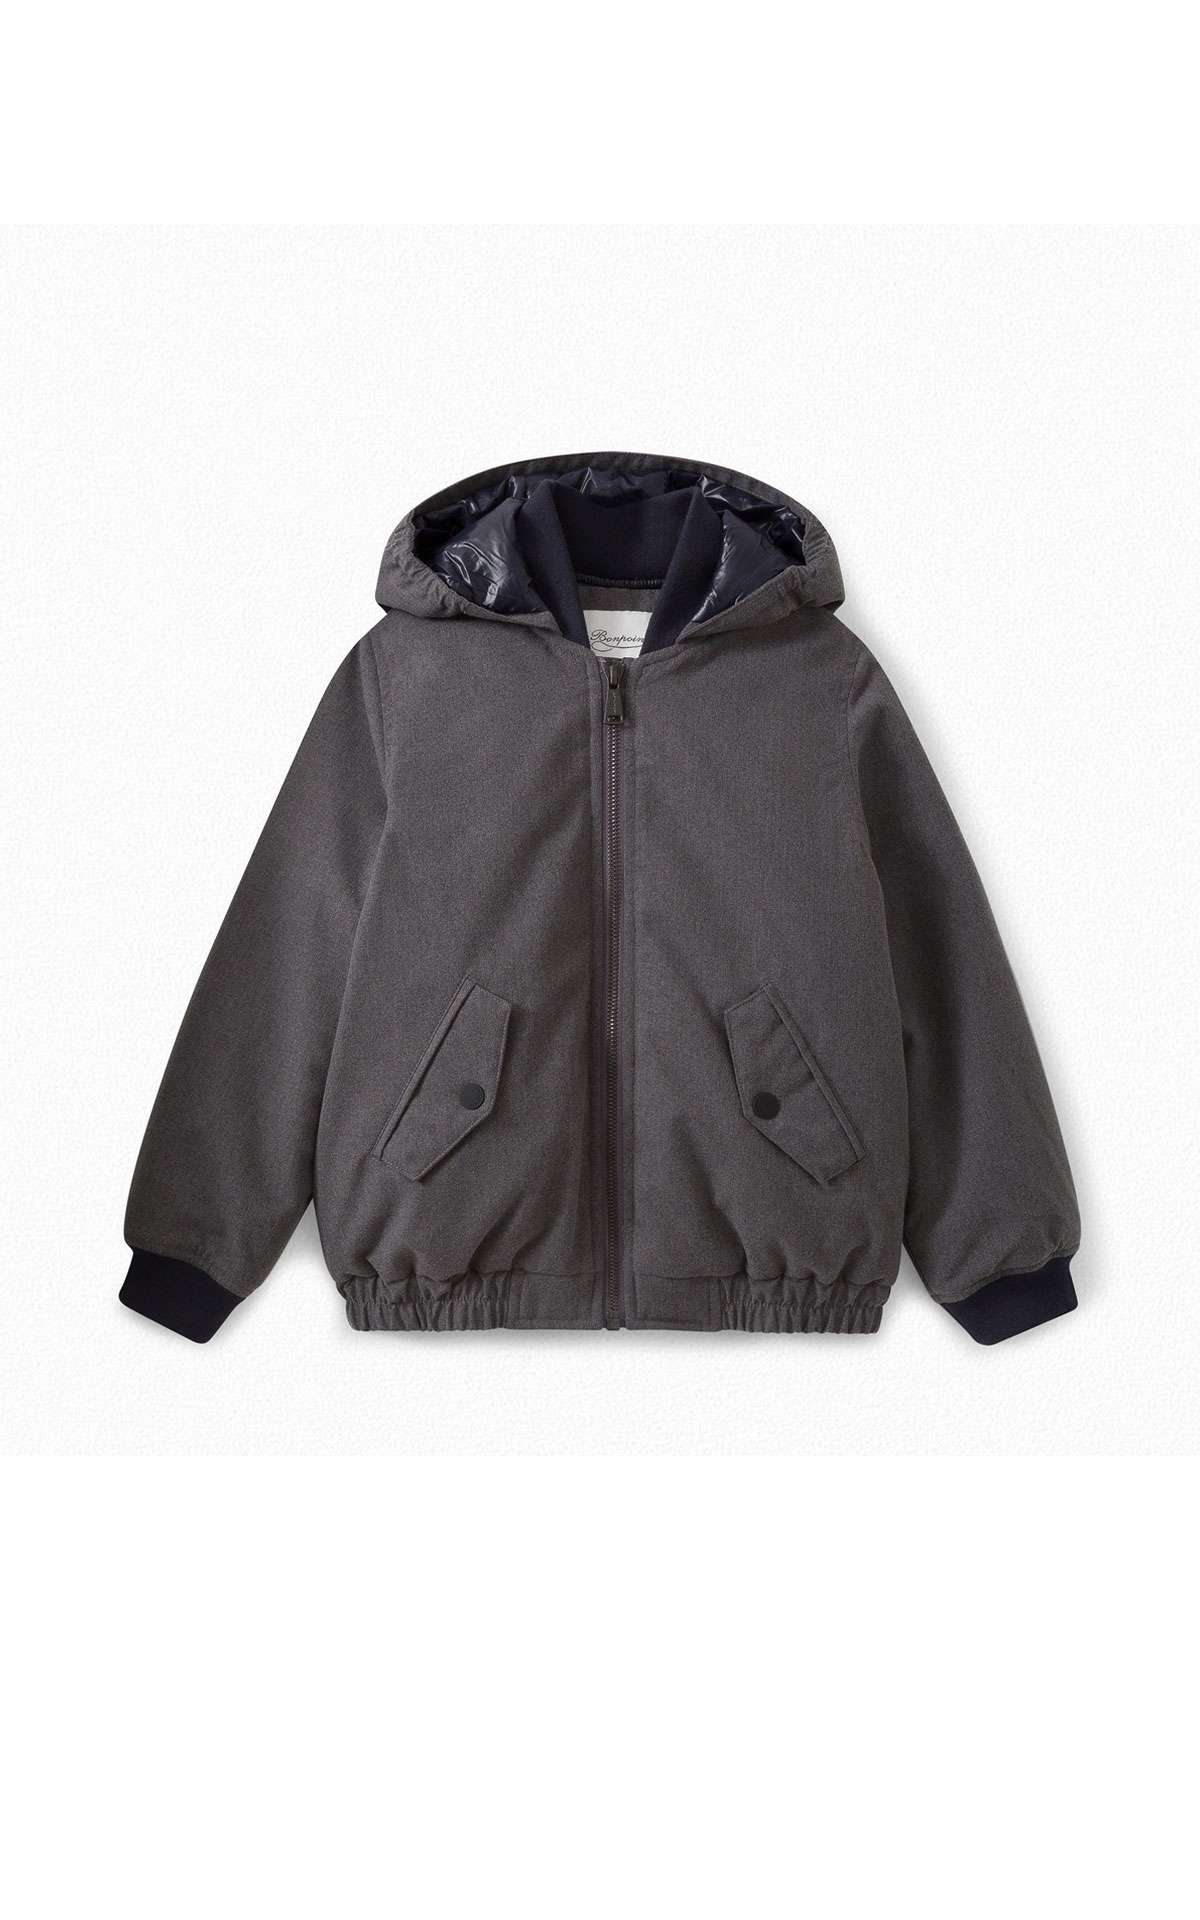 Bonpoint Pierce hooded bomber from Bicester Village